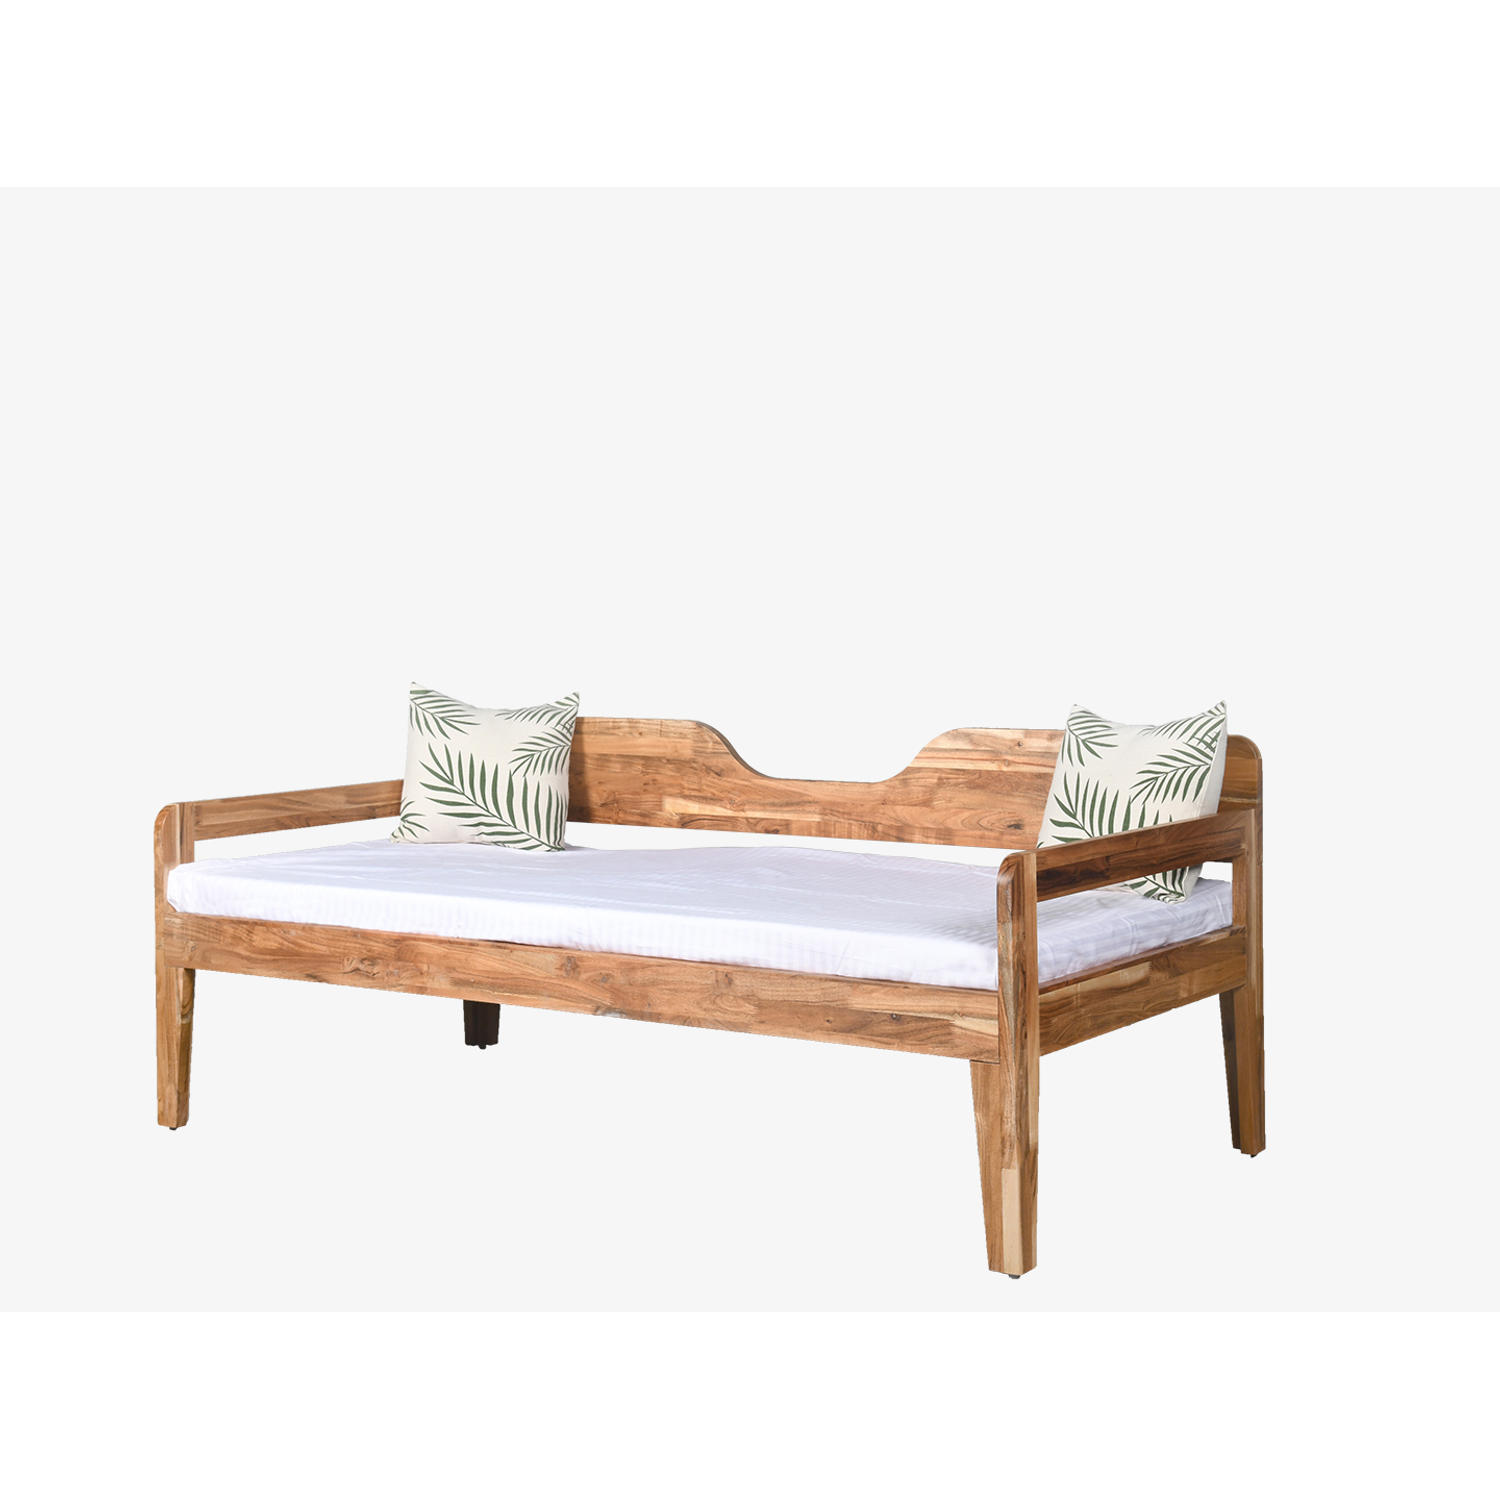 Greece day bed